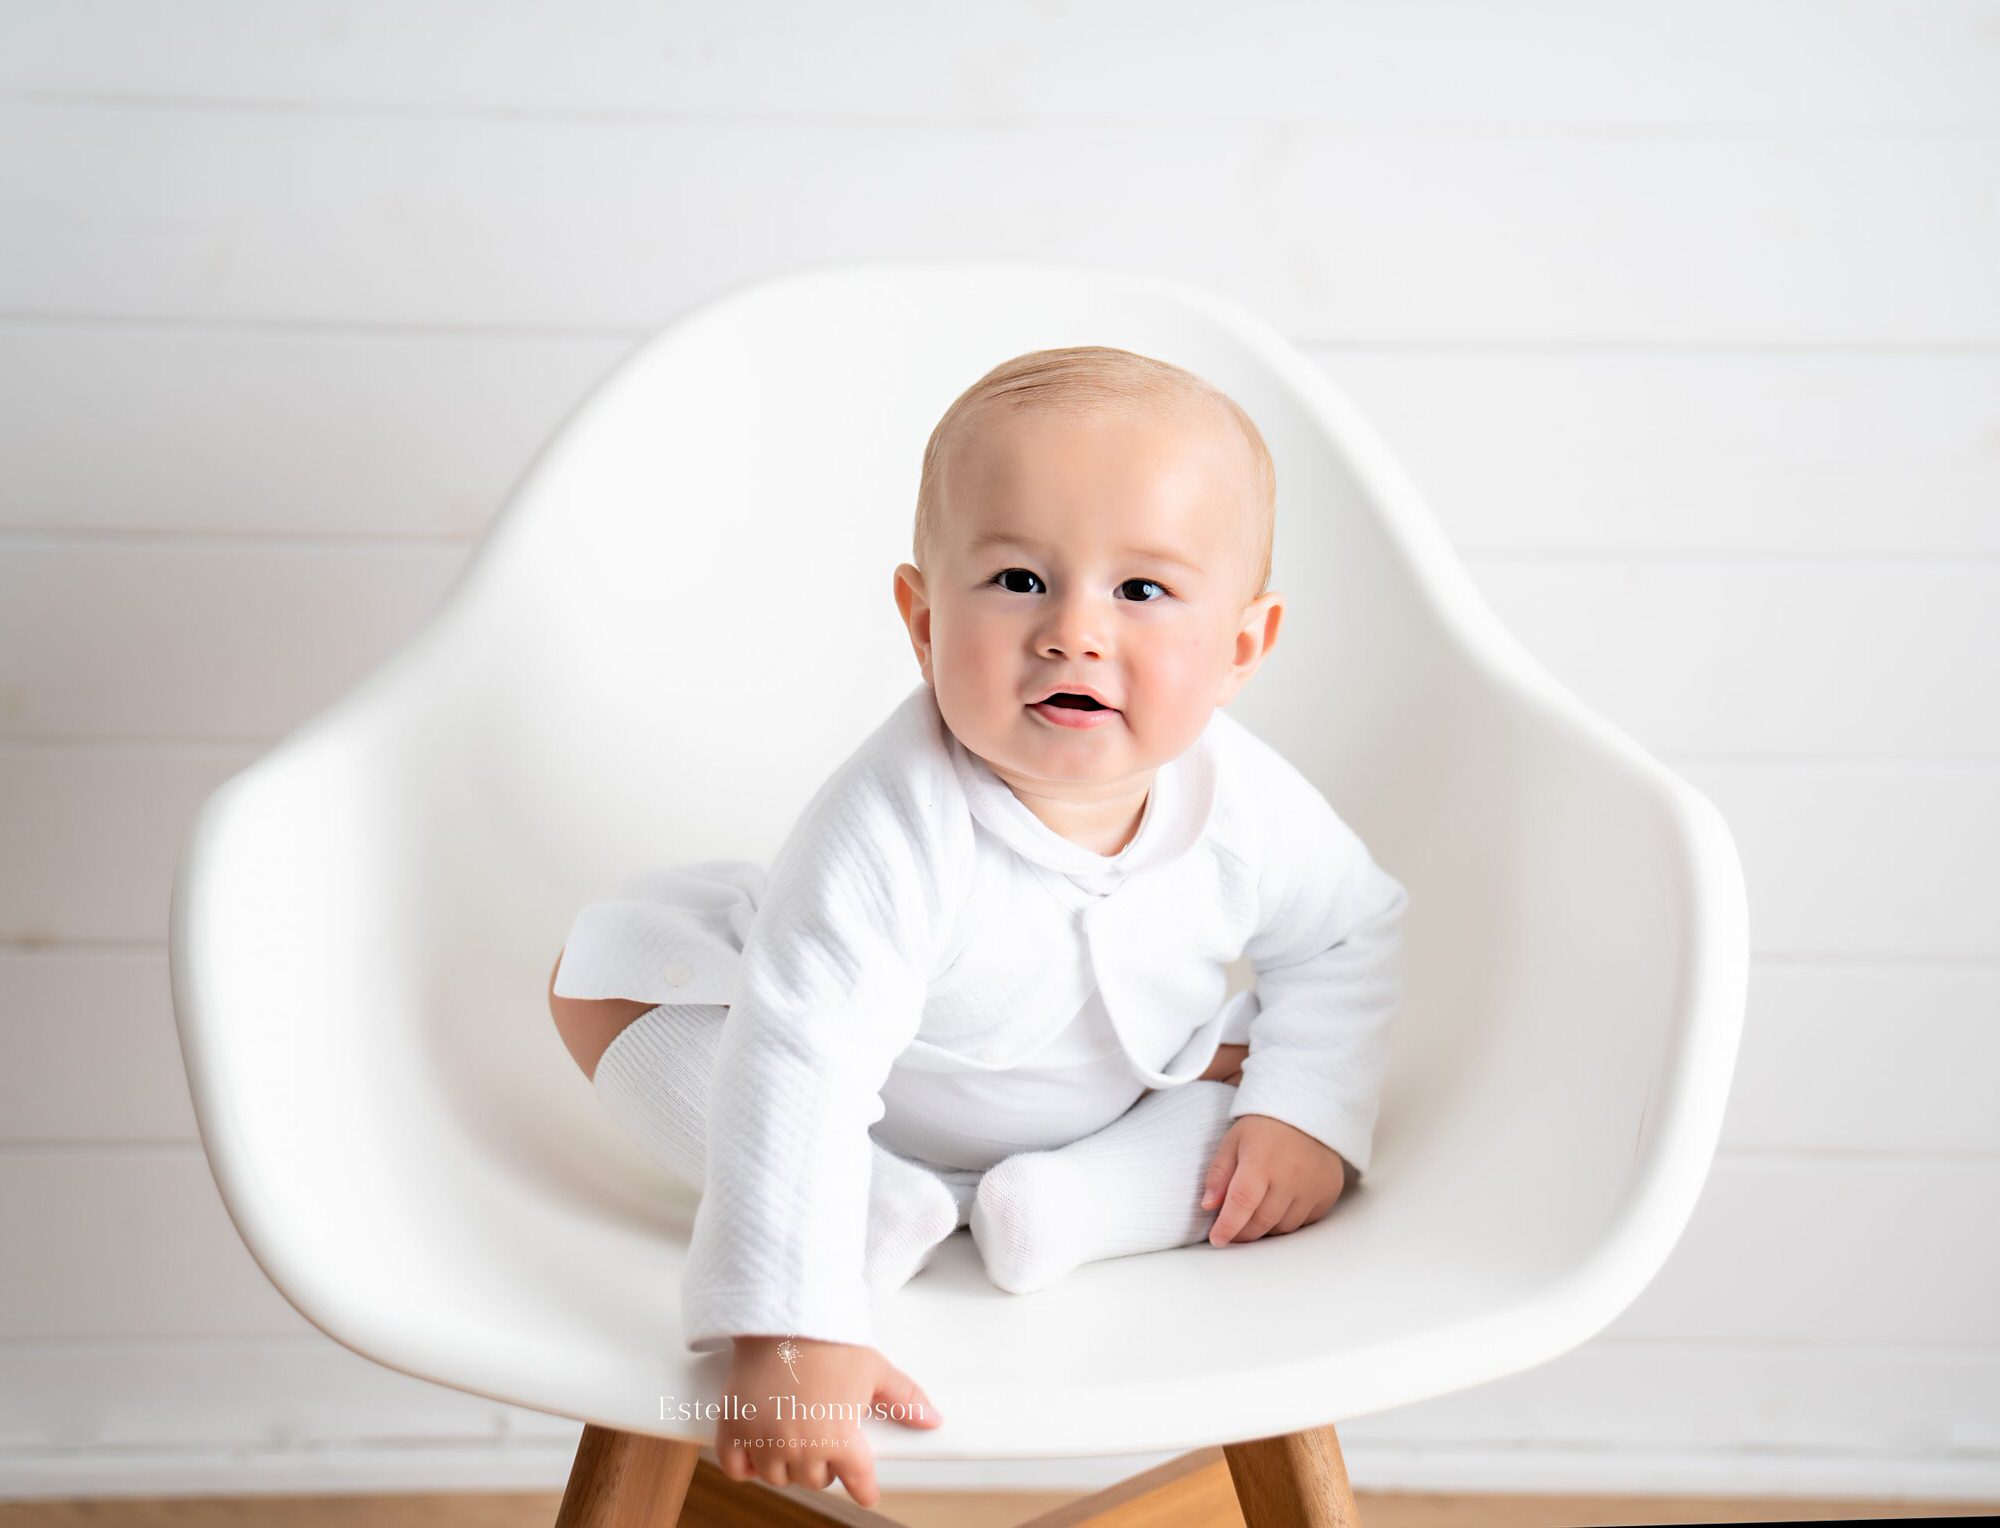 Baby sitting on a white chair in a sevenoaks photography studio